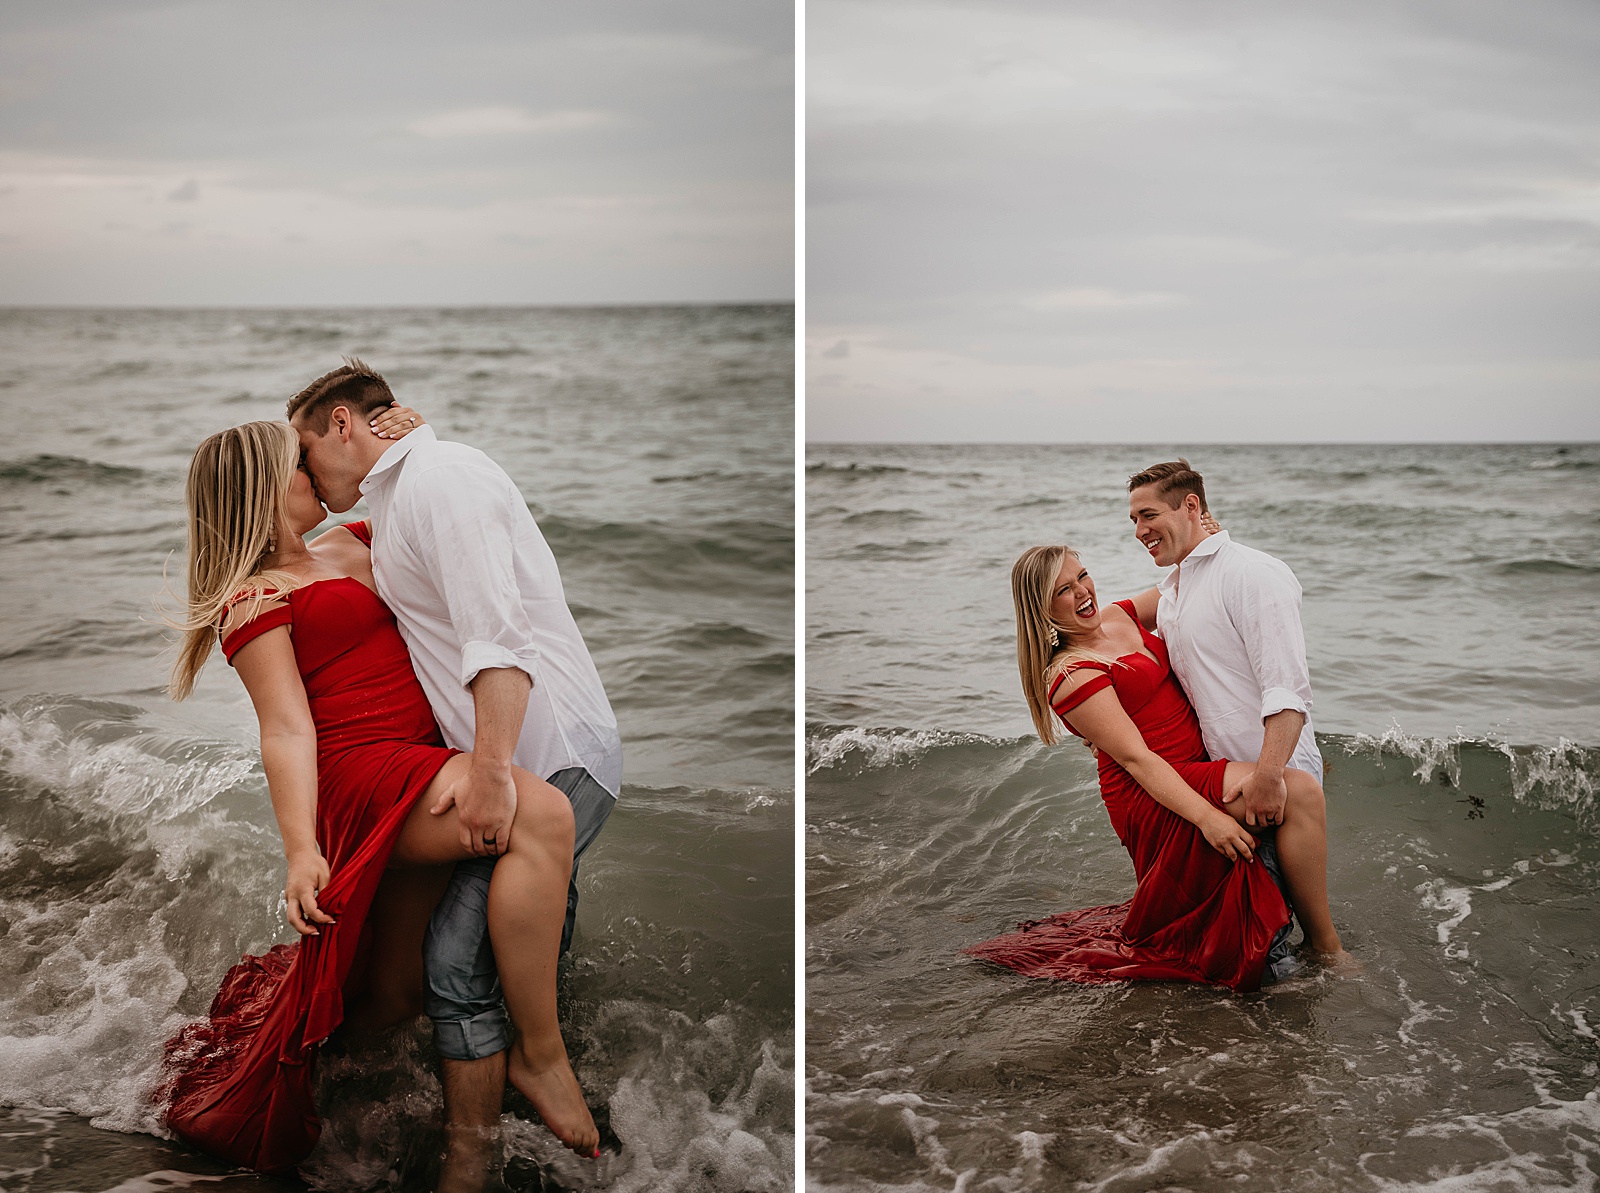 Bold Palm Beach Engagement Session captured by West Palm Beach engagement photographer, Krystal Capone Photography